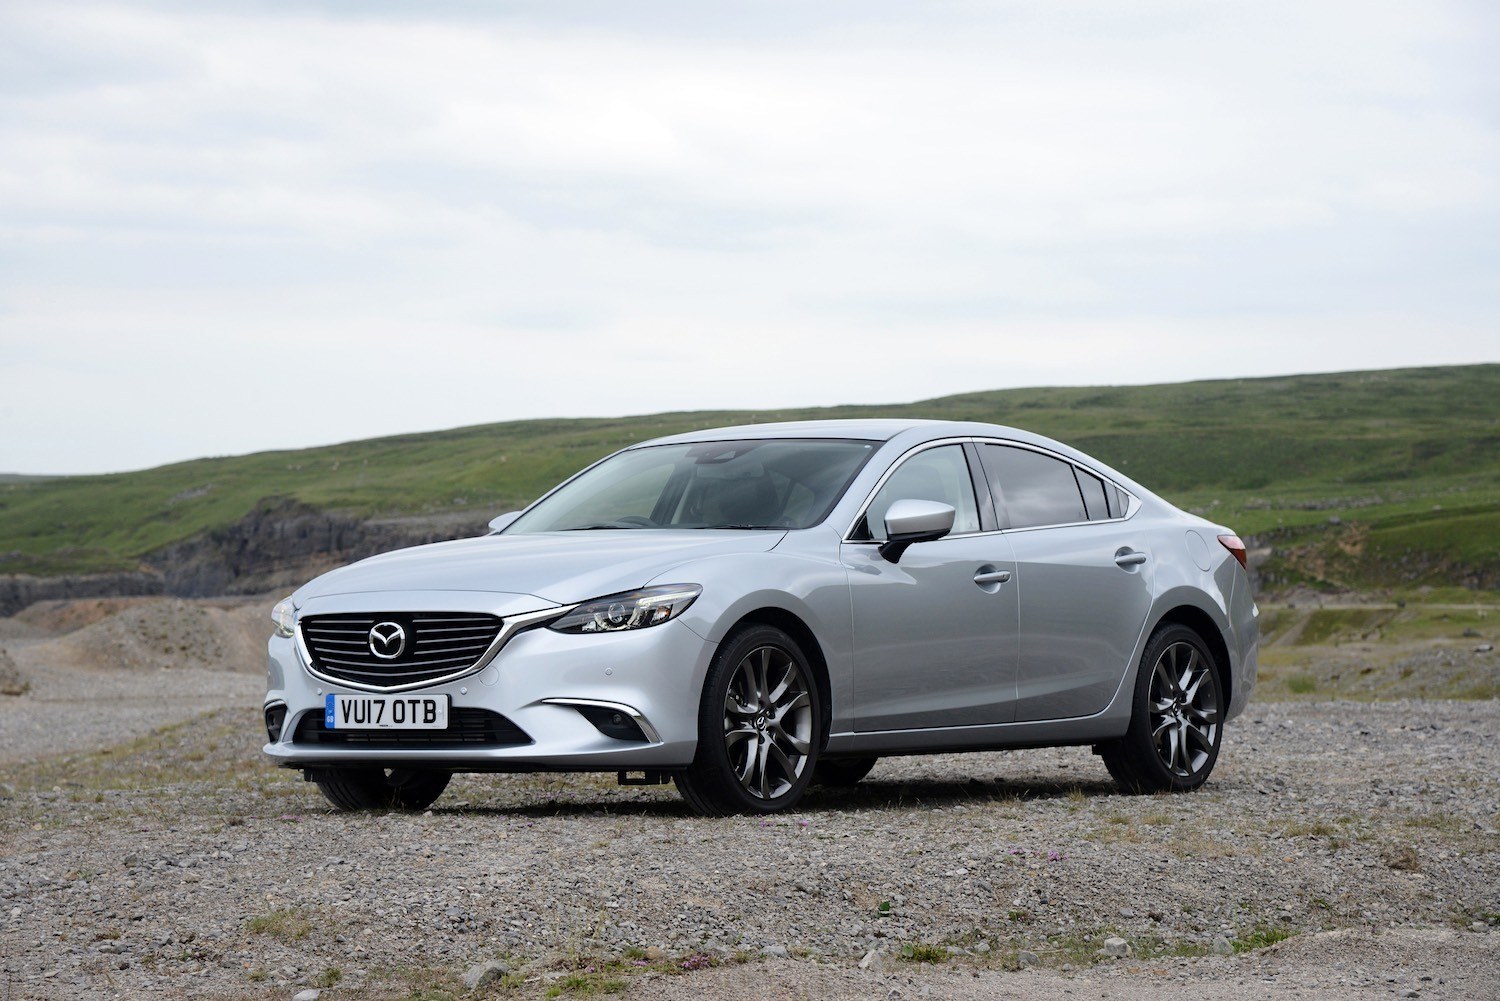 Tom Scanlan reviews the 2017 Mazda 6 Saloon for Drive 6